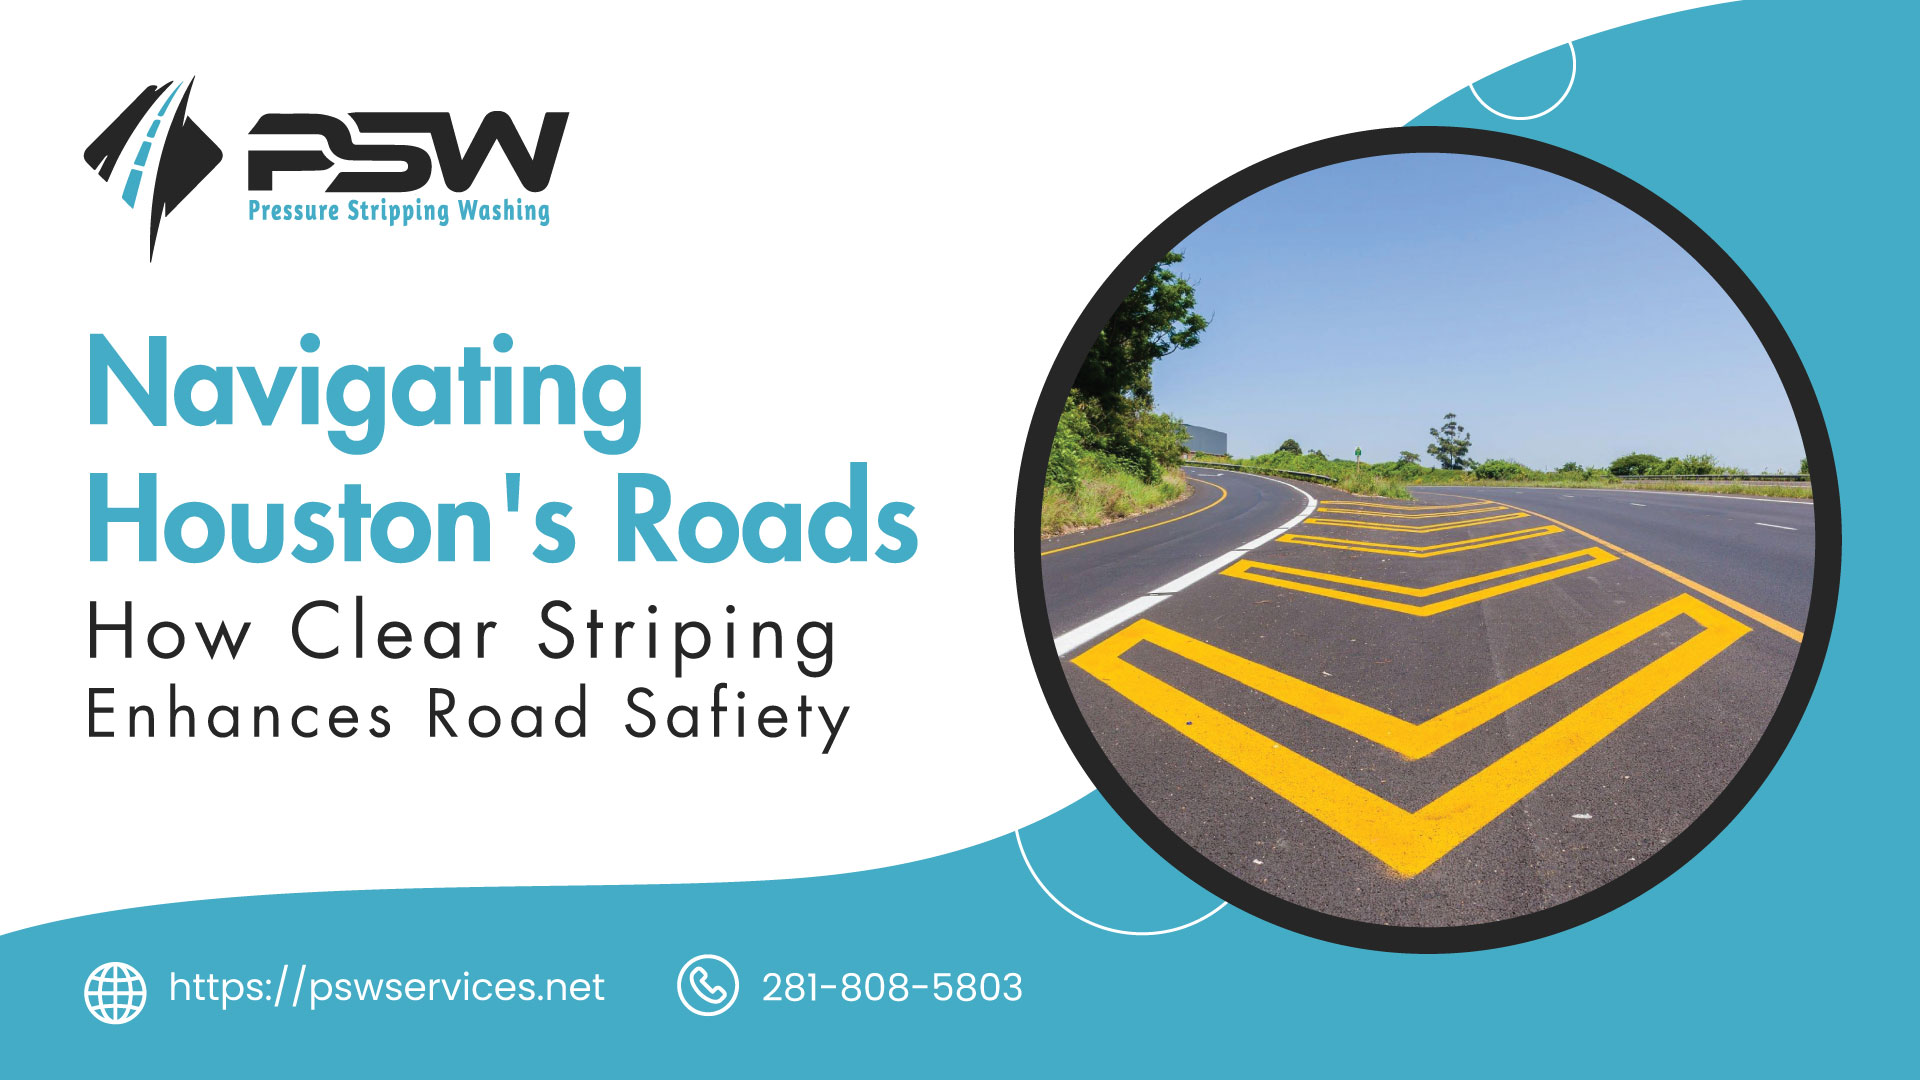 Navigating Houston’s Roads: How Clear Striping Enhances Road Safety